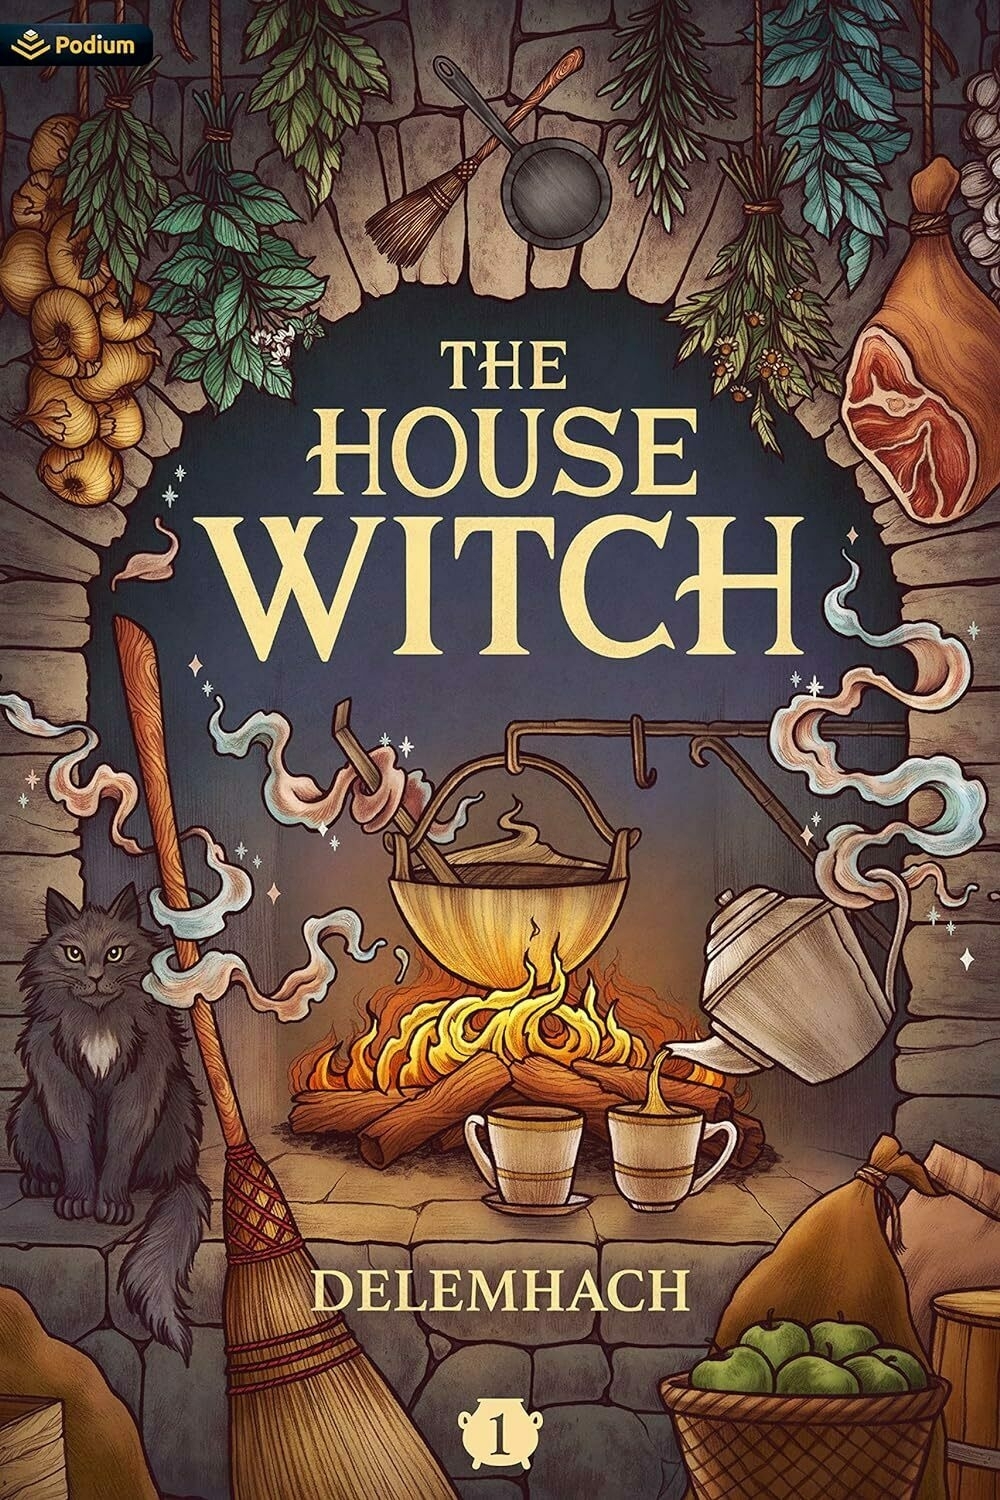 Book cover art for The House Witch